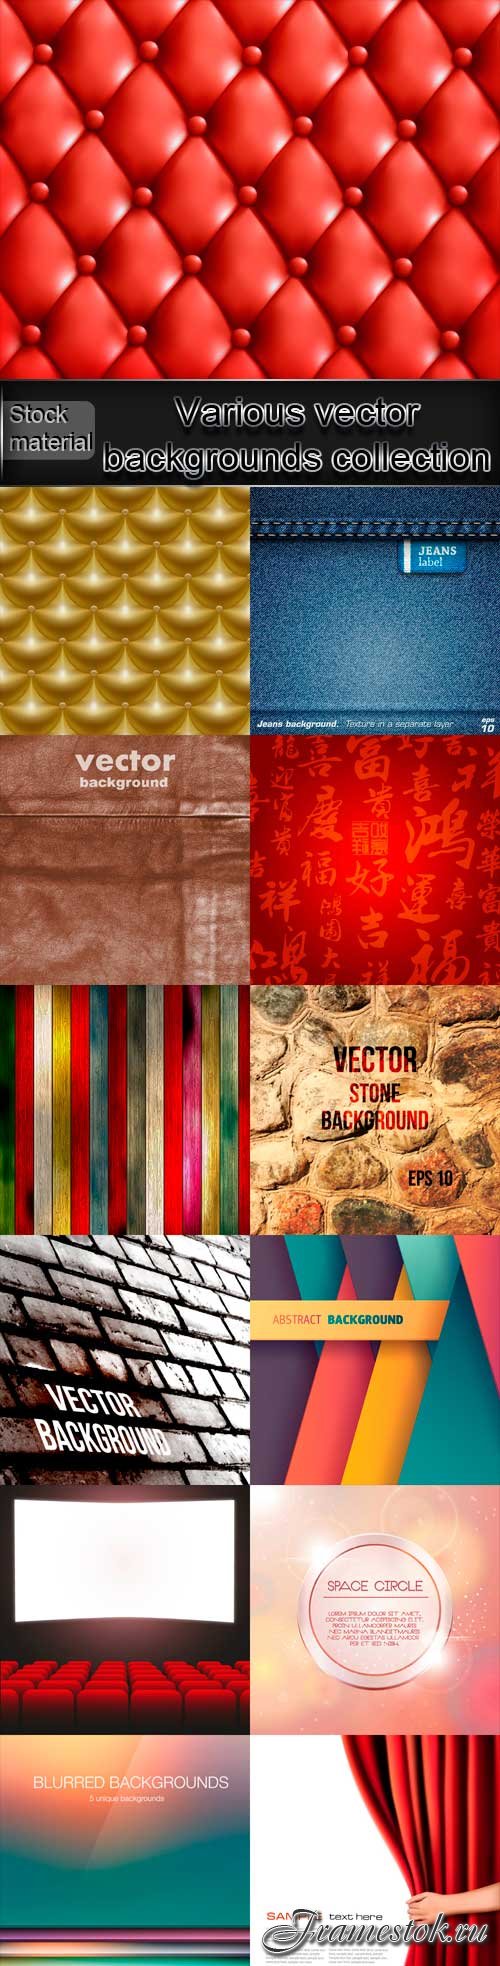 Various vector backgrounds collection